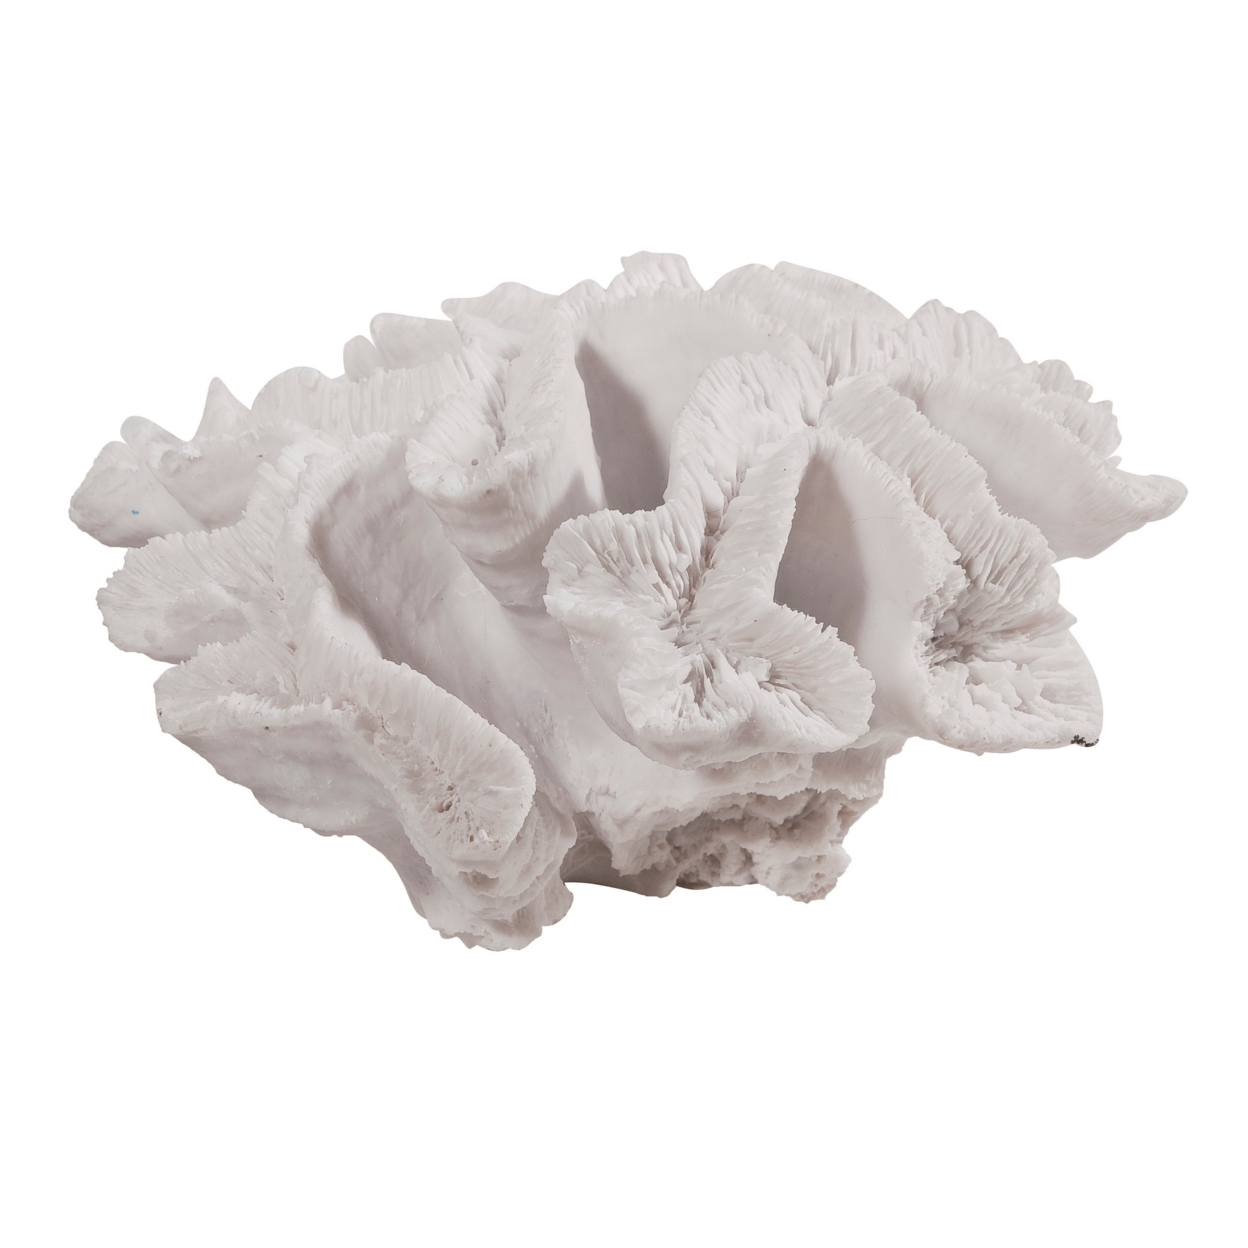 Lily 9 Inch Faux Coral Table Figurine, Polyresin Textured Sculpture, White- Saltoro Sherpi